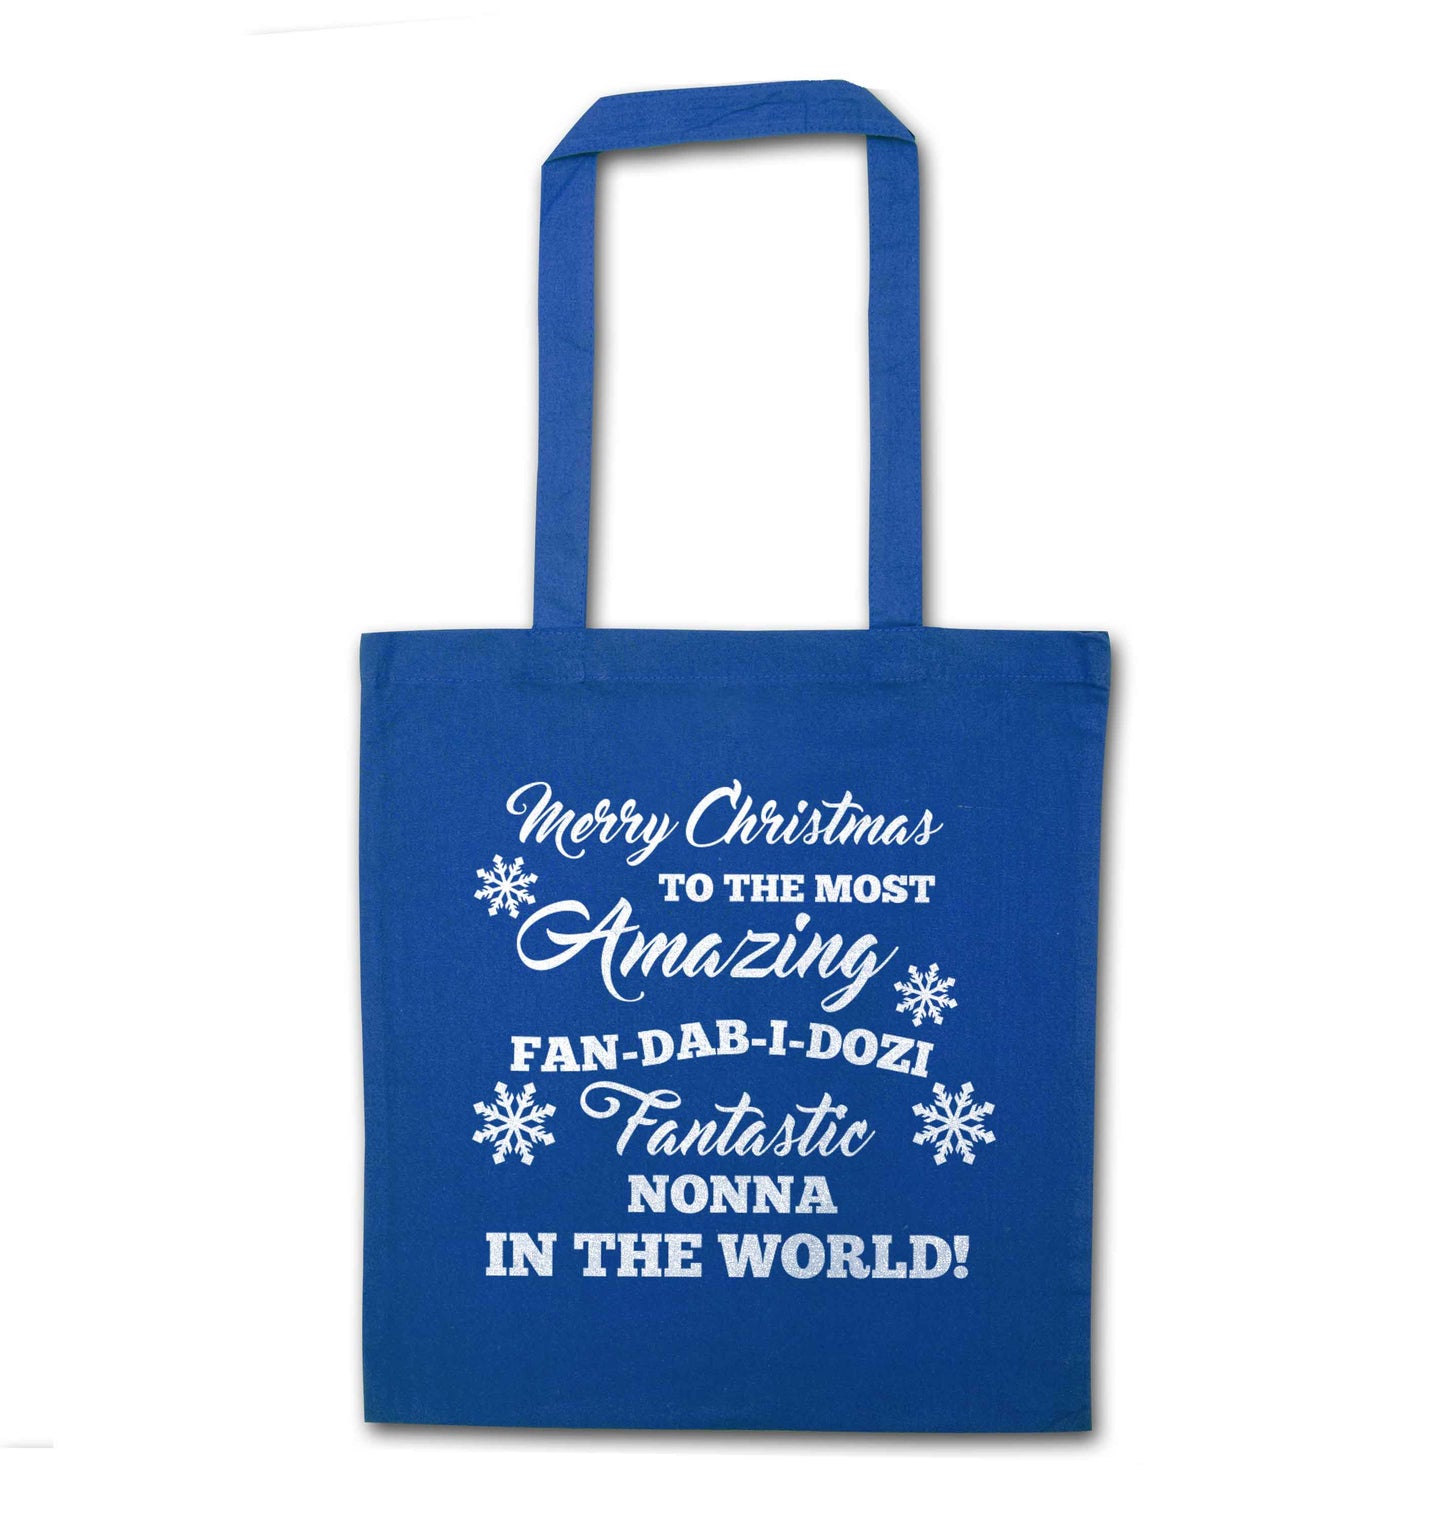 Merry Christmas to the most amazing fan-dab-i-dozi fantasic Nonna in the world blue tote bag